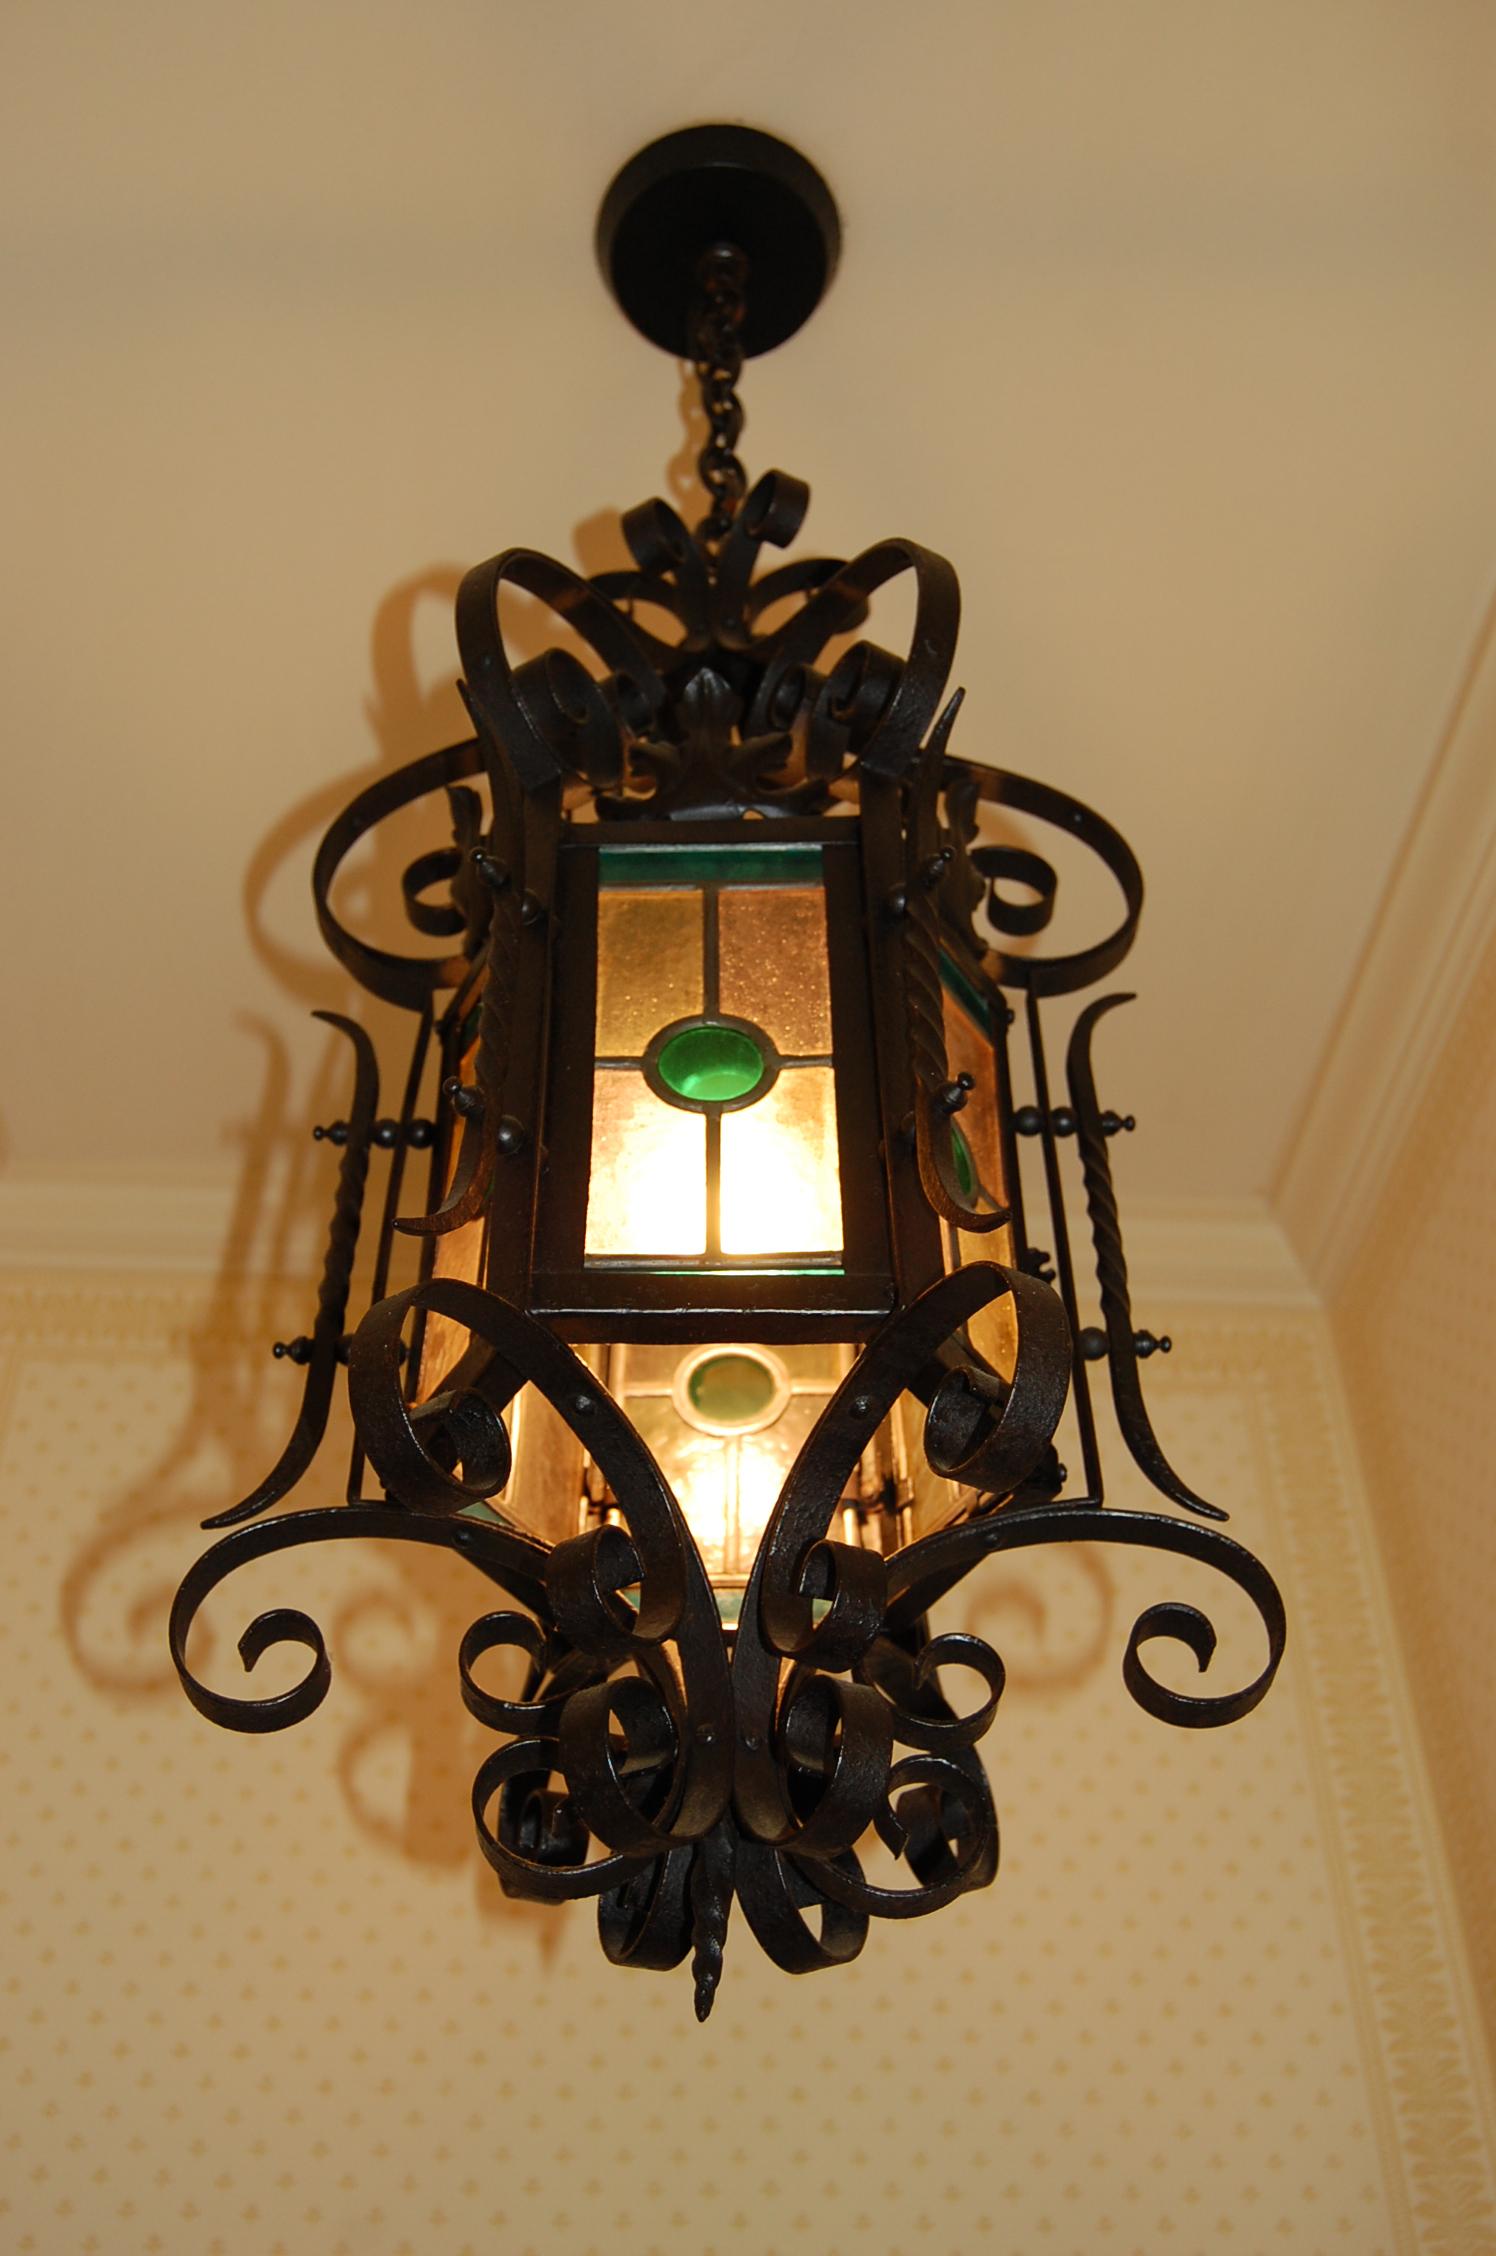 Hand-Crafted Ornate American 19th Century Iron & Tole Hanging Lantern, Colored Glass Panels